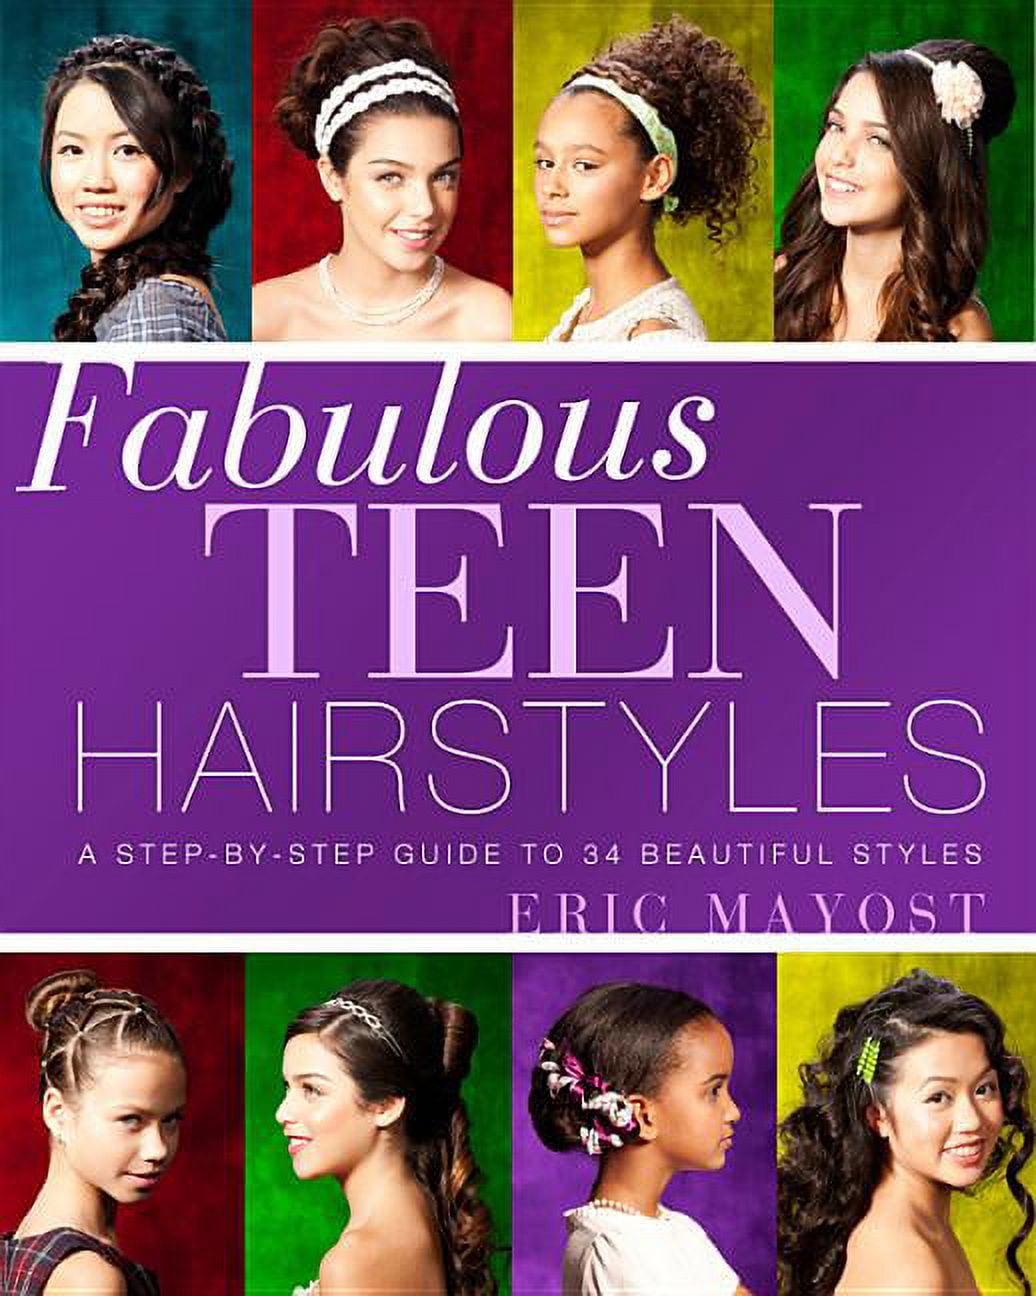 Fabulous Archives - Top 10 hairstyles